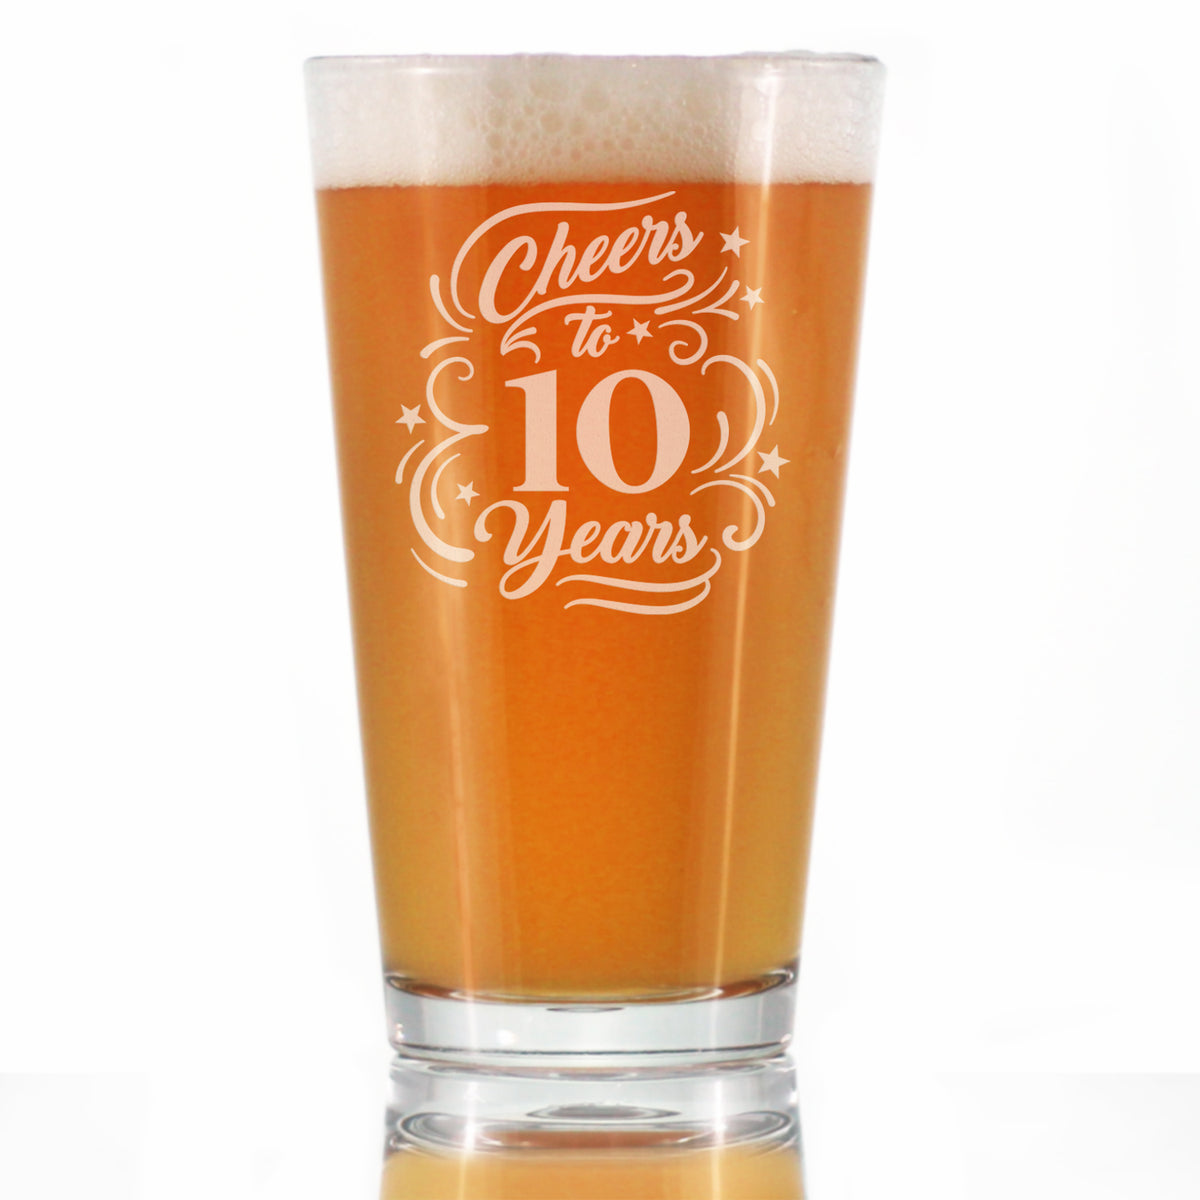 Cheers to 10 Years - Pint Glass for Beer - Gifts for Women &amp; Men - 10th Anniversary Party Decor - 16 Oz Glass